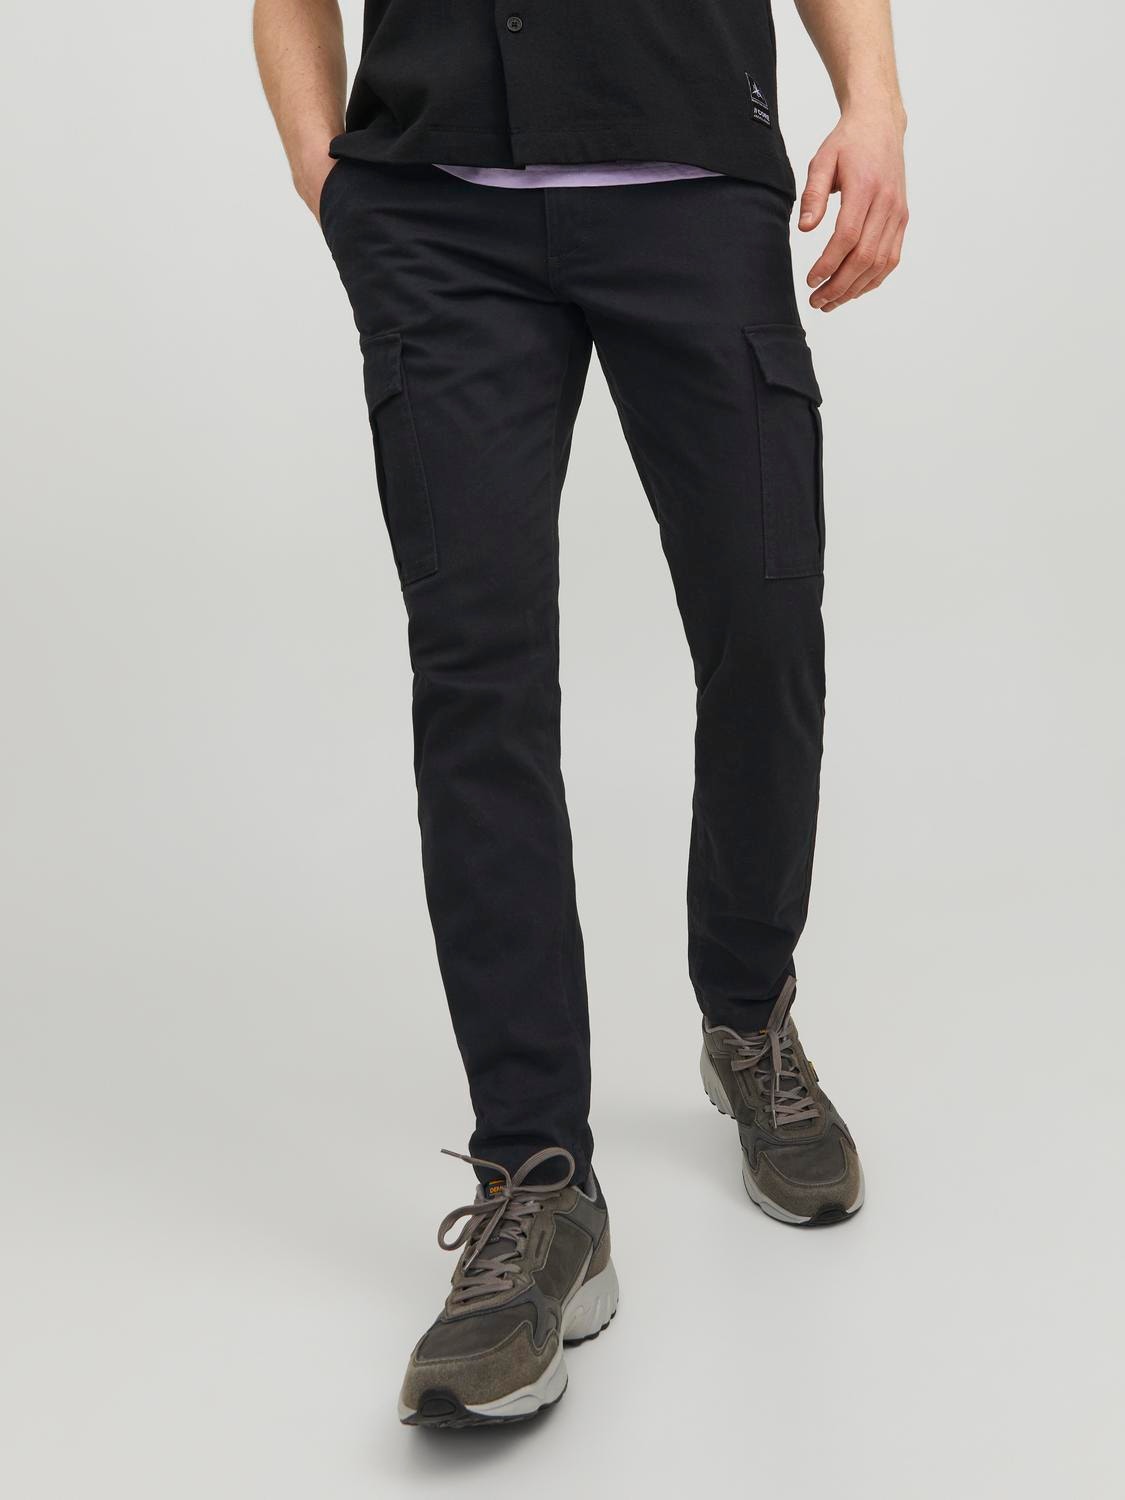 Jack and Jones Cargo Trousers Chinos Mens Jeans Slim-Fit